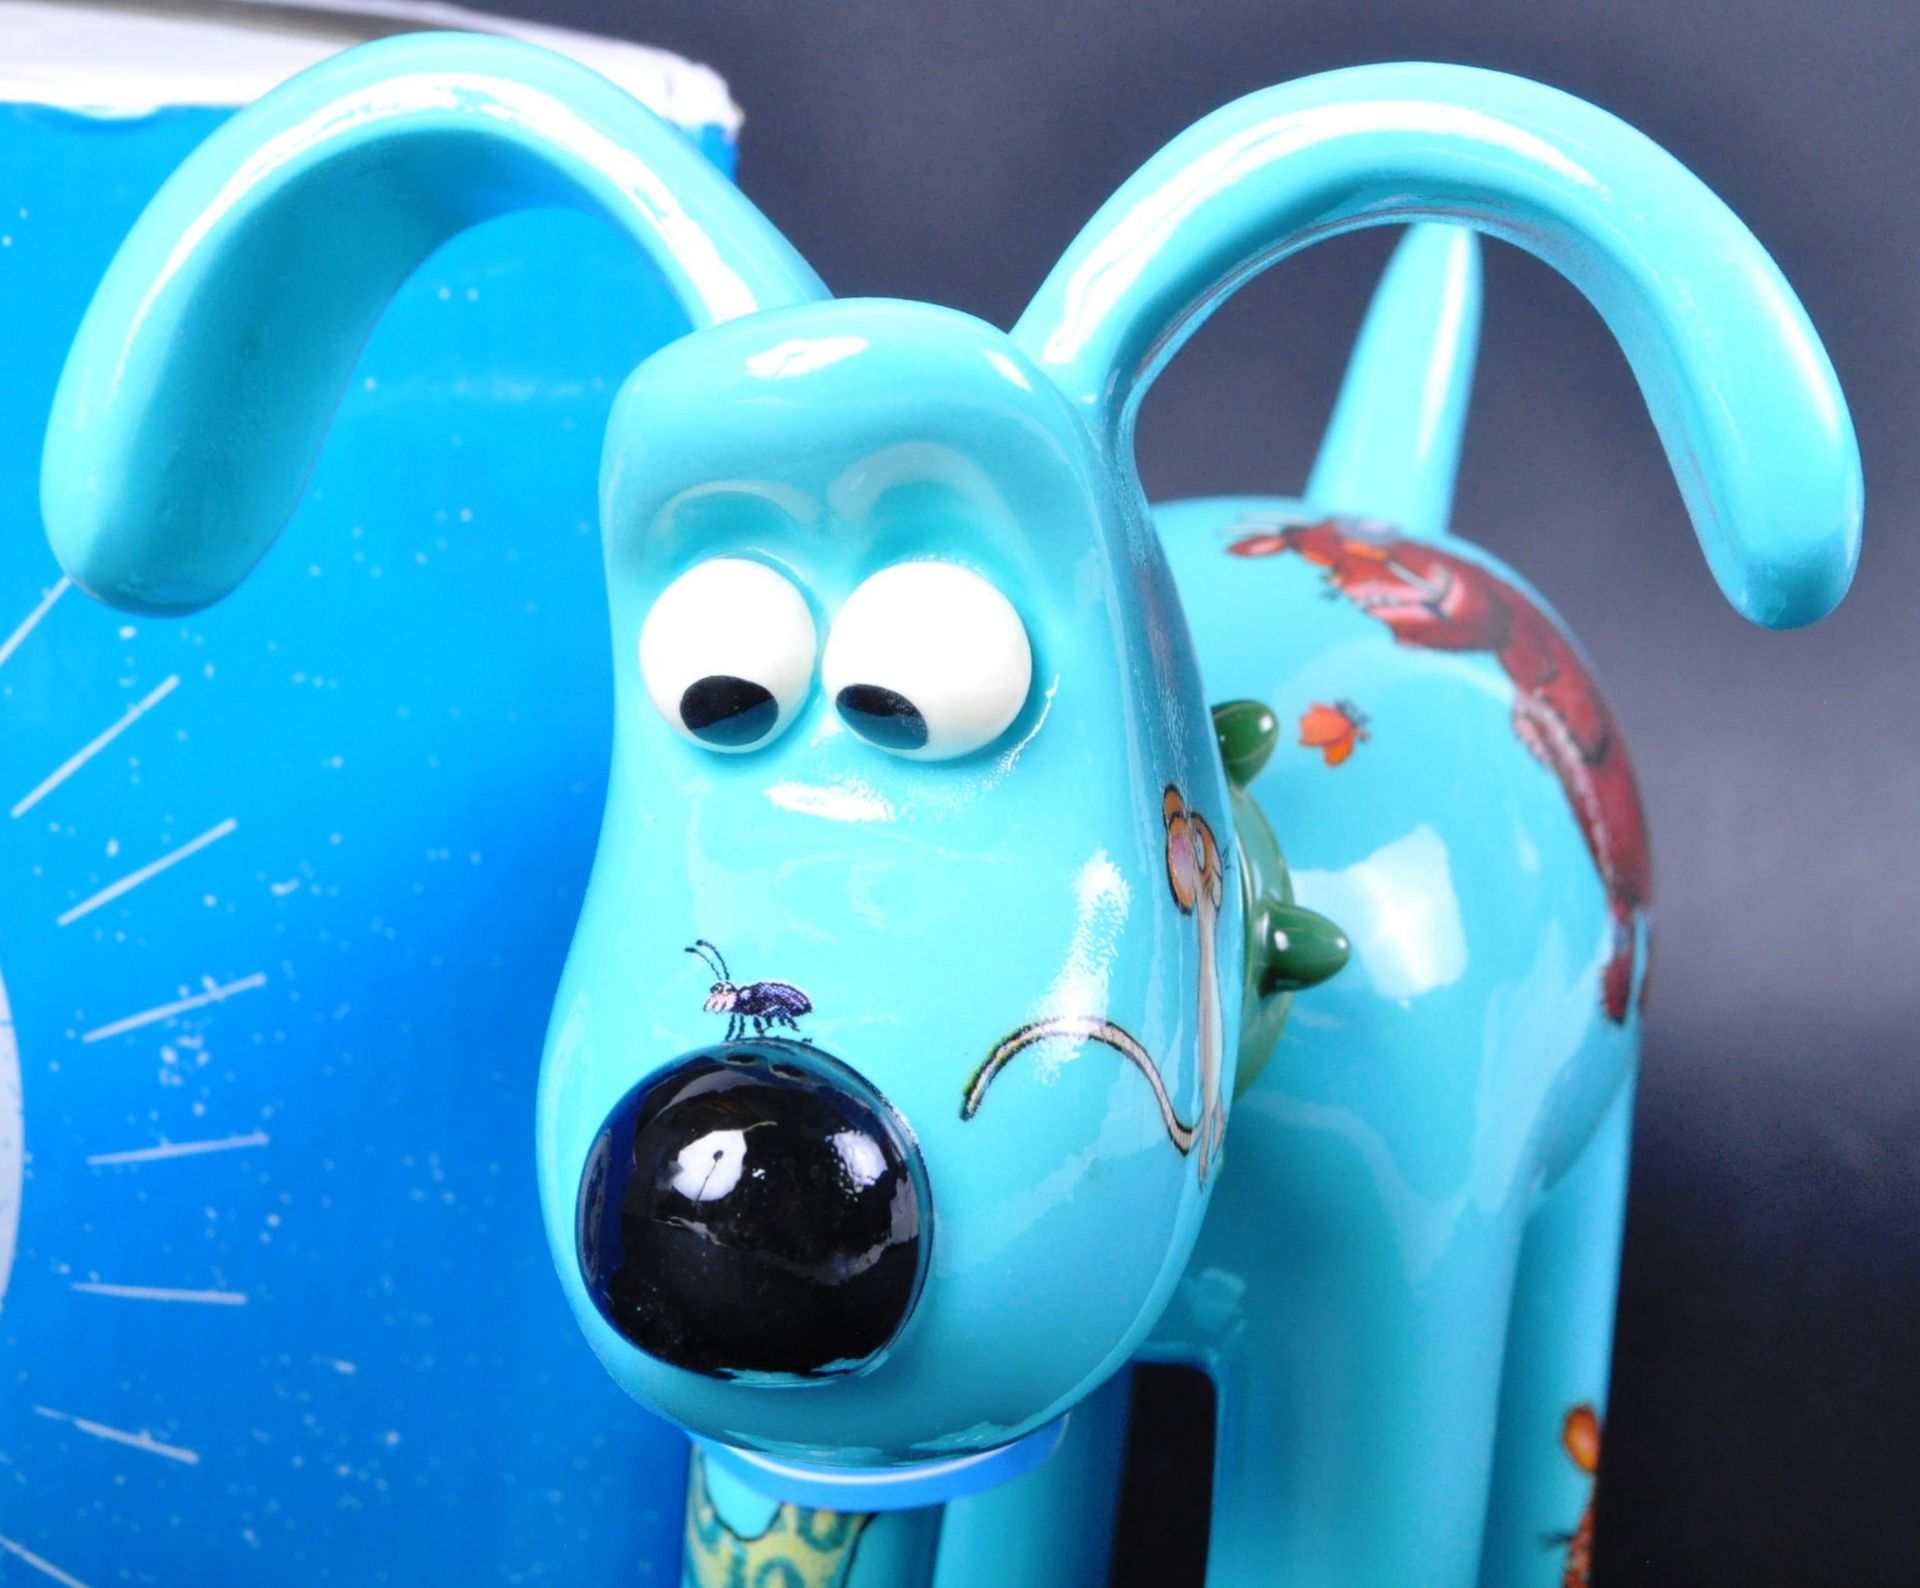 WALLACE & GROMIT - GROMIT UNLEASHED COLLECTABLE FIGURINE - Image 2 of 4